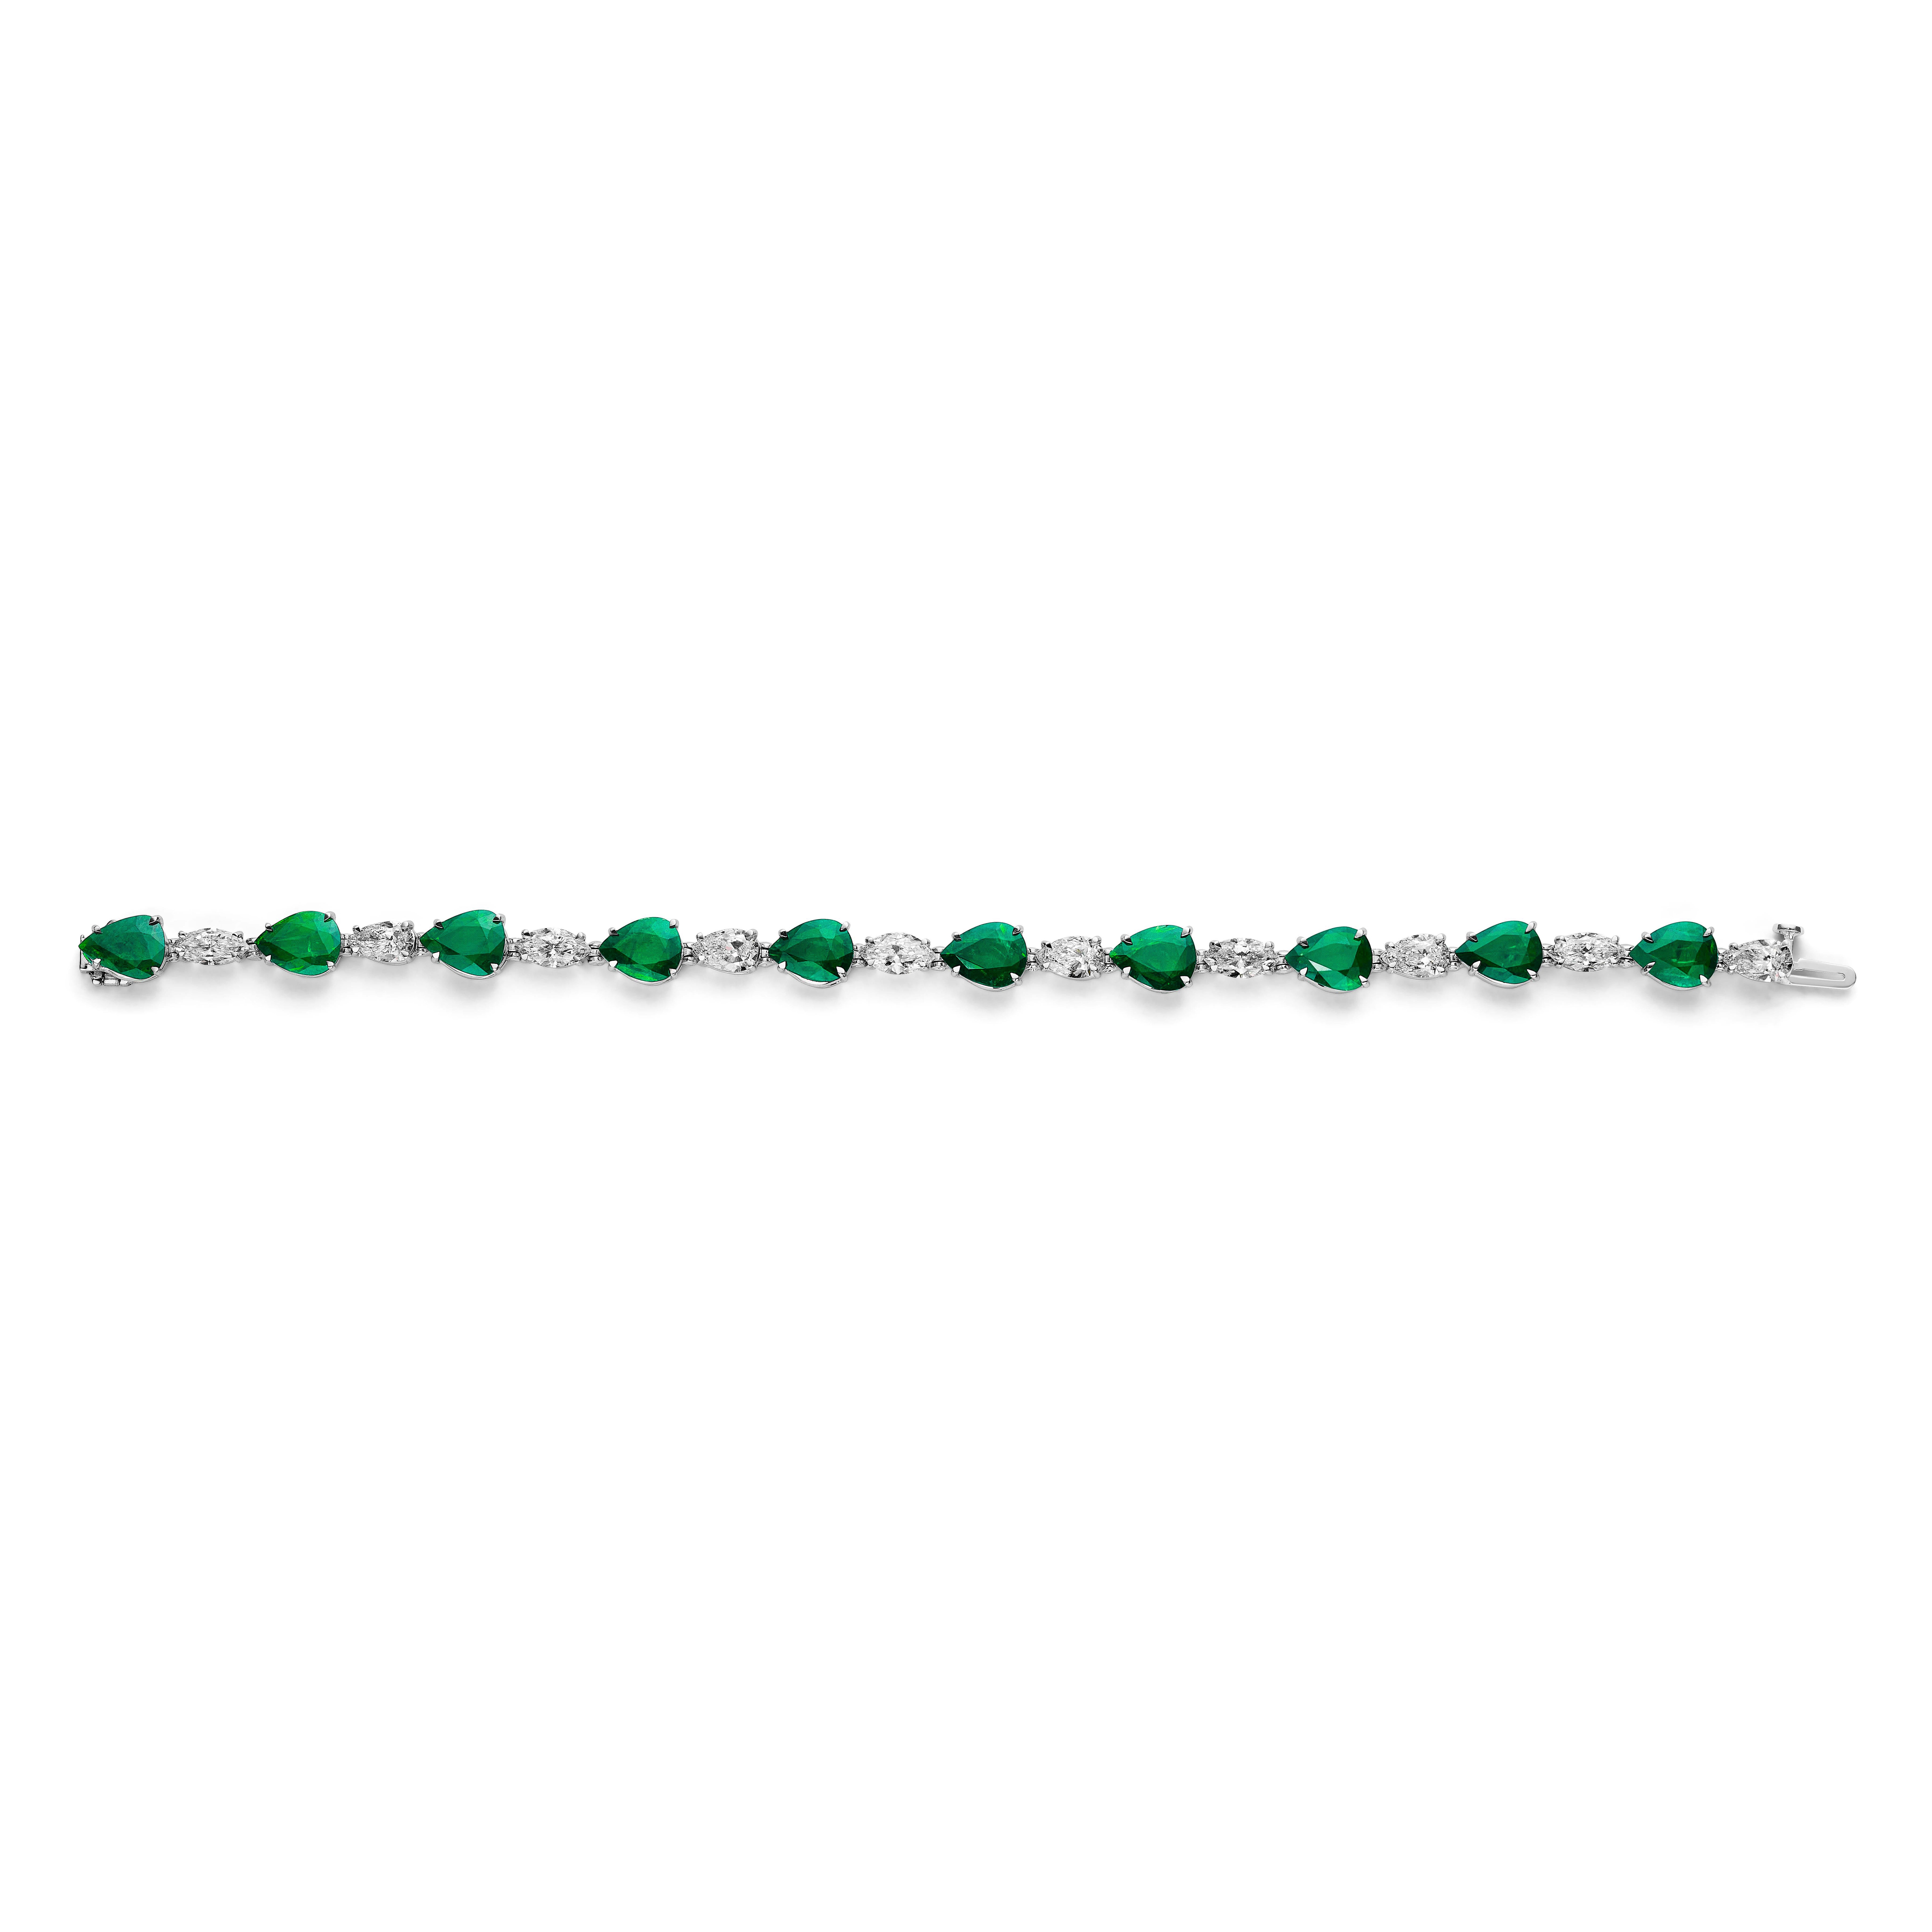 Magnificent Ruby and Diamond Bracelet

10 Pear shaped Emeralds weighing approximately 11.75 Carats, alternating with 10 Marquise and Pear shaped Diamonds weighing approximately 5.05 Carats.
Each Diamond is individually certified by GIA as DEF color